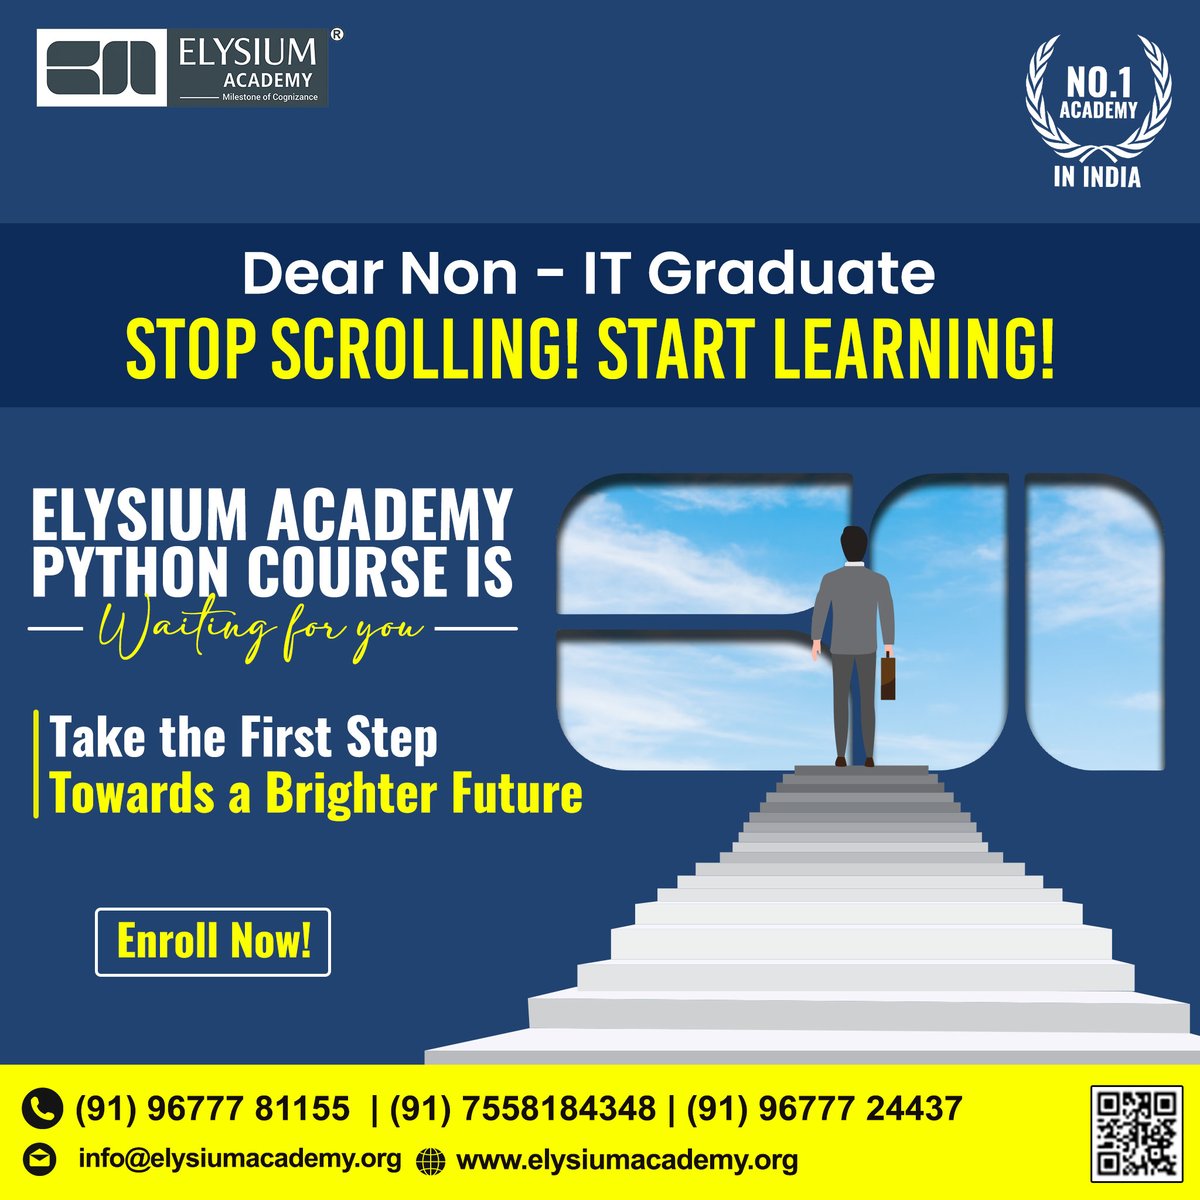 Enhance your skill with mind blowing Python course.
#elysiumacademy #no1academy #jobassistance #tesbocourse #coding #programming #programmer #python #developer #javascript #code #coder #technology #html #computerscience #java  #css #software #softwaredeveloper #pythoncourse